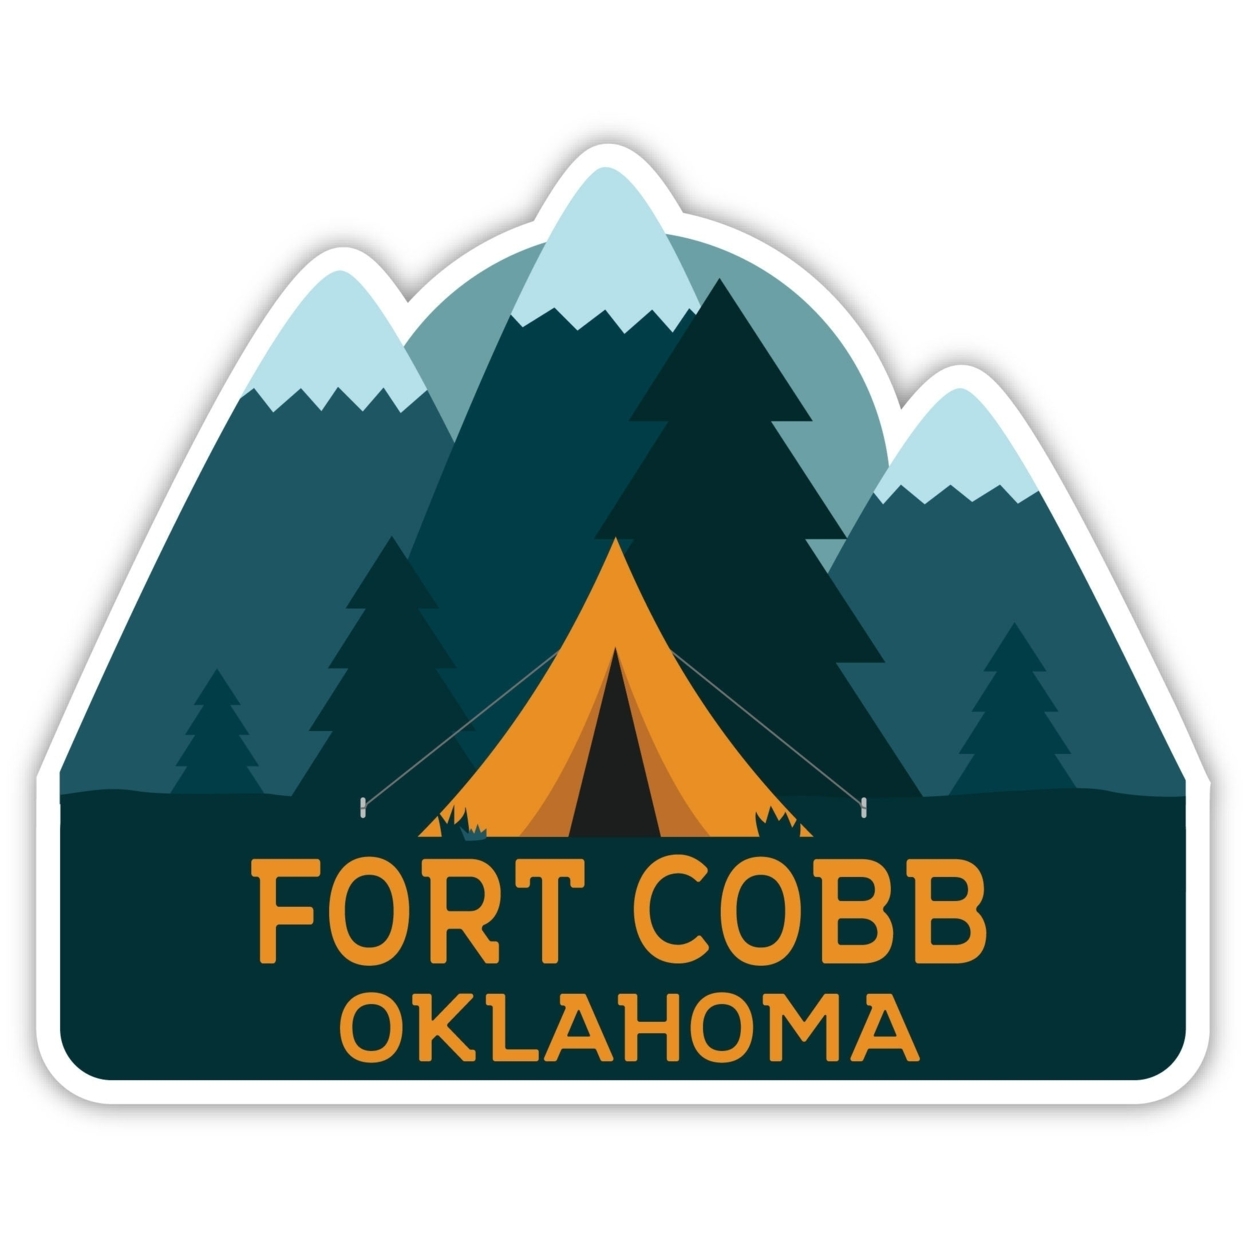 Fort Cobb Oklahoma Souvenir Decorative Stickers (Choose Theme And Size) - 4-Pack, 10-Inch, Bear